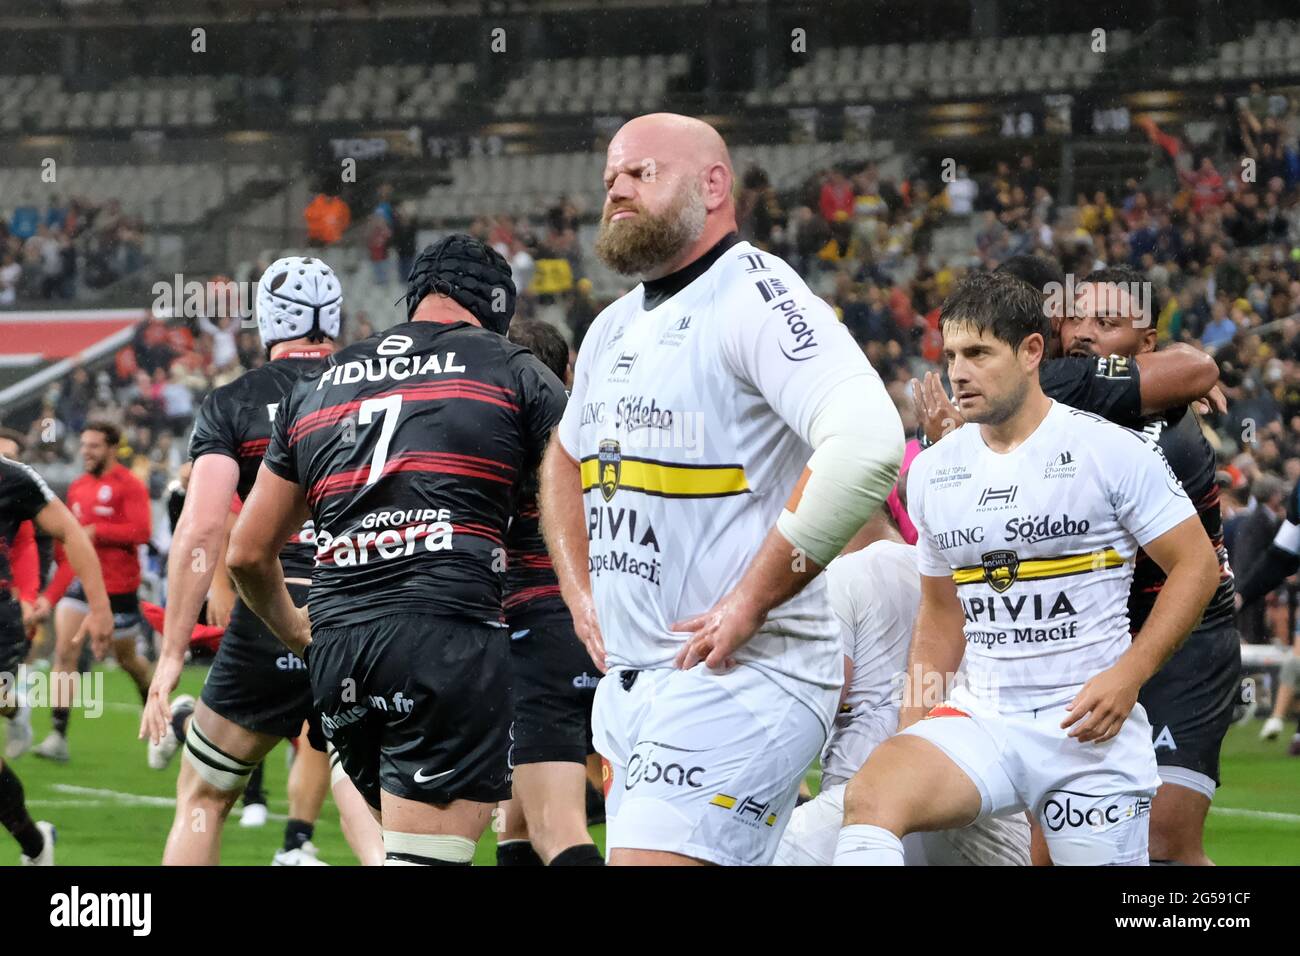 Paris, France. 26th June, 2021. disappointment of Stade Rochelais Prop  ARTHUR JOLY after defeat during the final of French rugby Championship Top  14 between Stade Toulousain and Stade Rochelais at Stade de